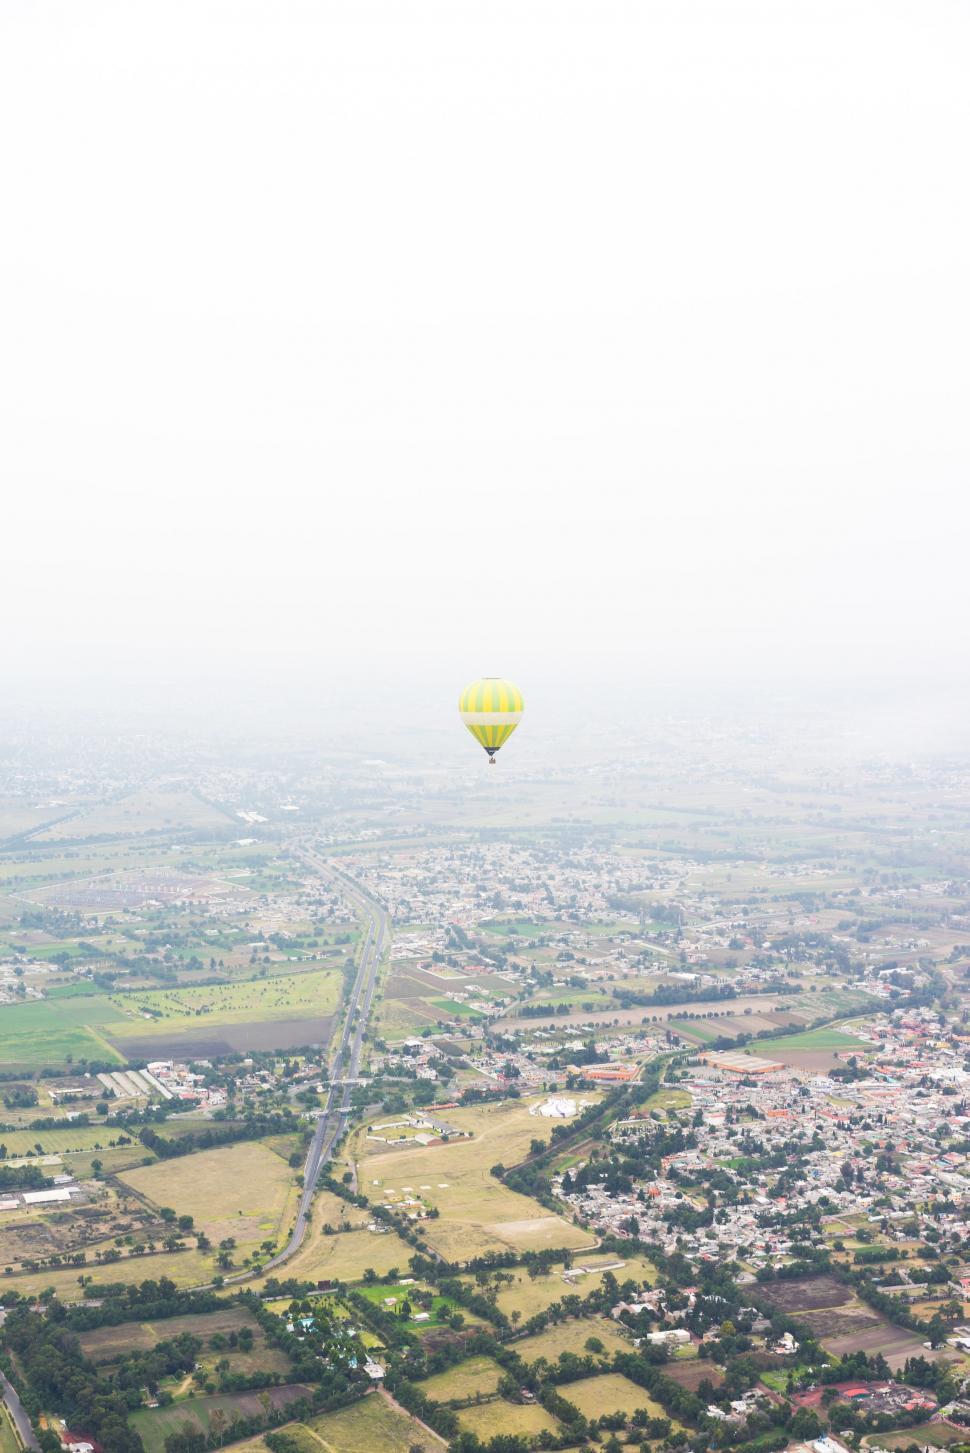 Free Image of Hot Air Balloon Flying Over City 